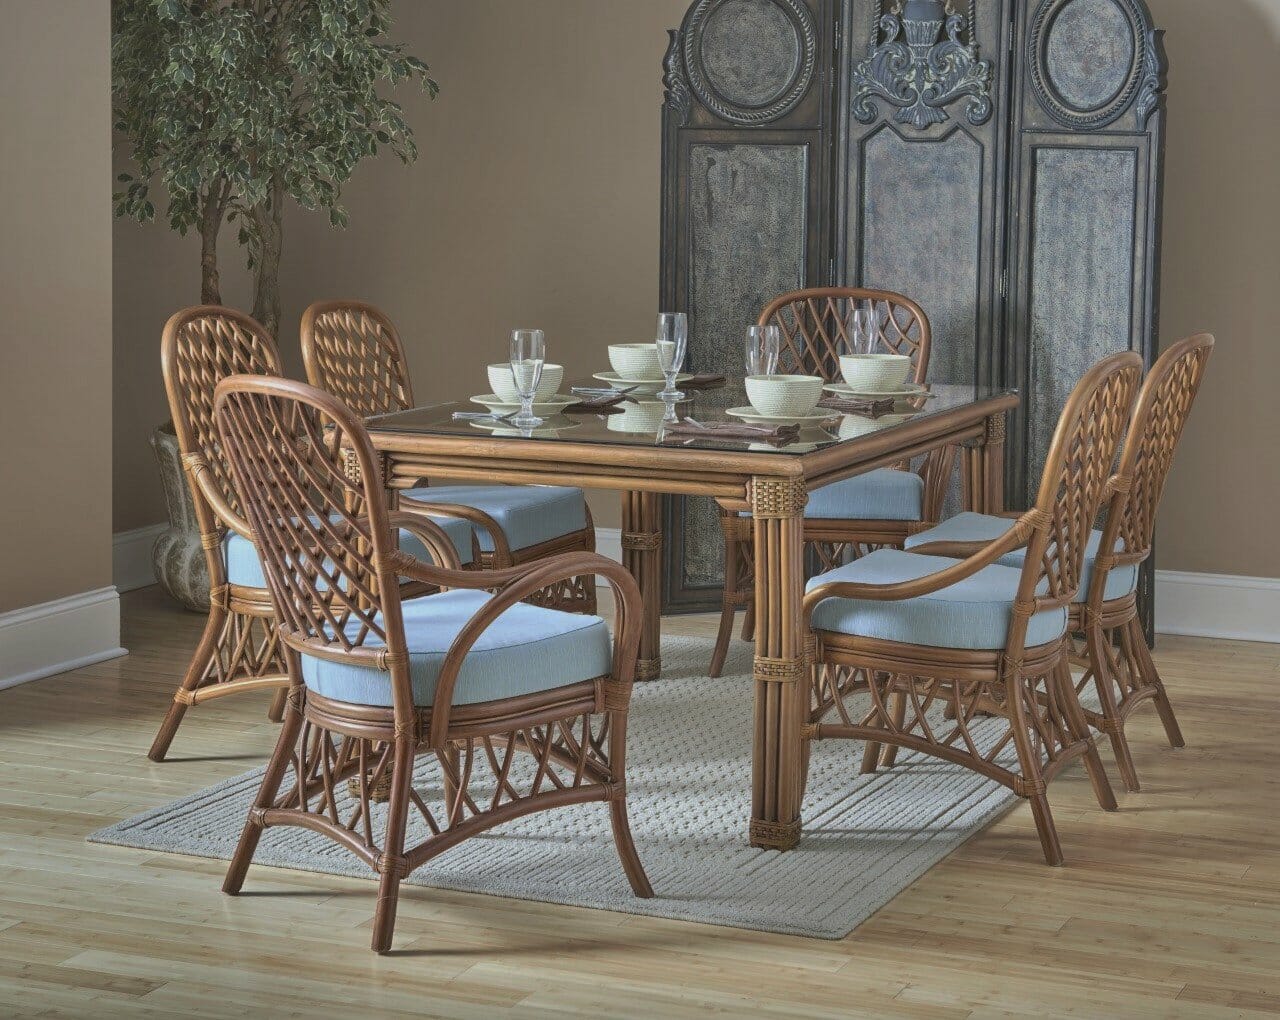 Rattan Dining Room Table And Chairs